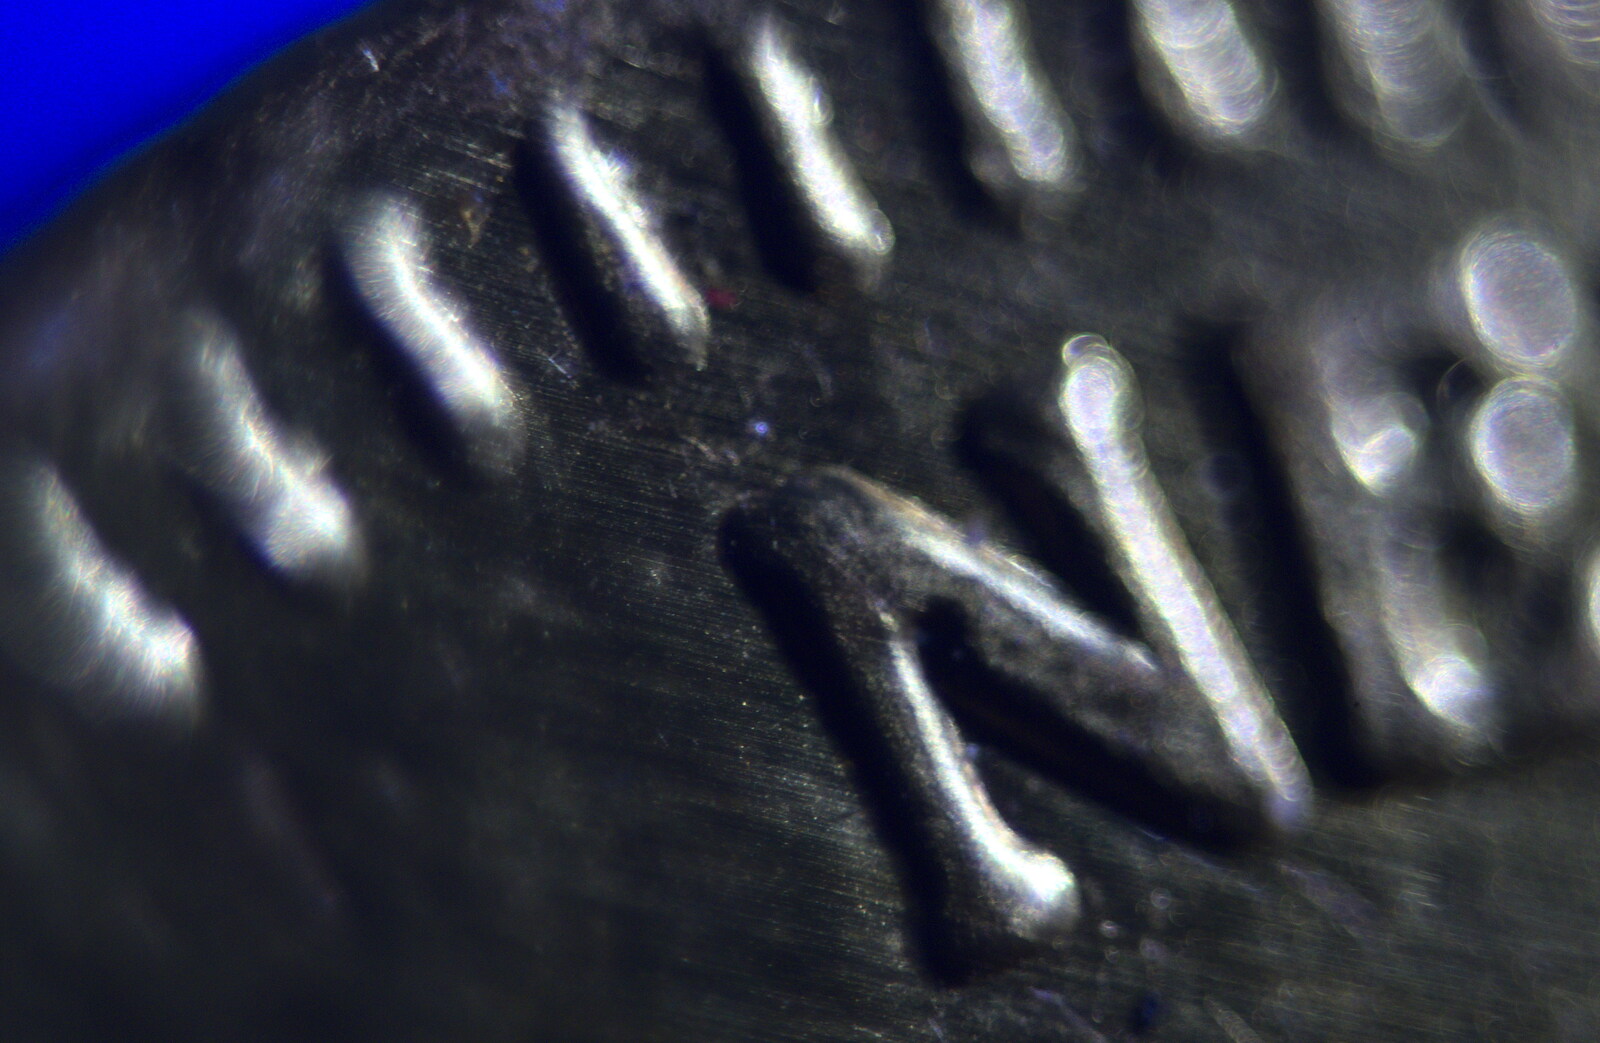 A macro photo of a 10p coin from A Spot of Camping, Alton Water, Stutton, Suffolk - 1st September 2018